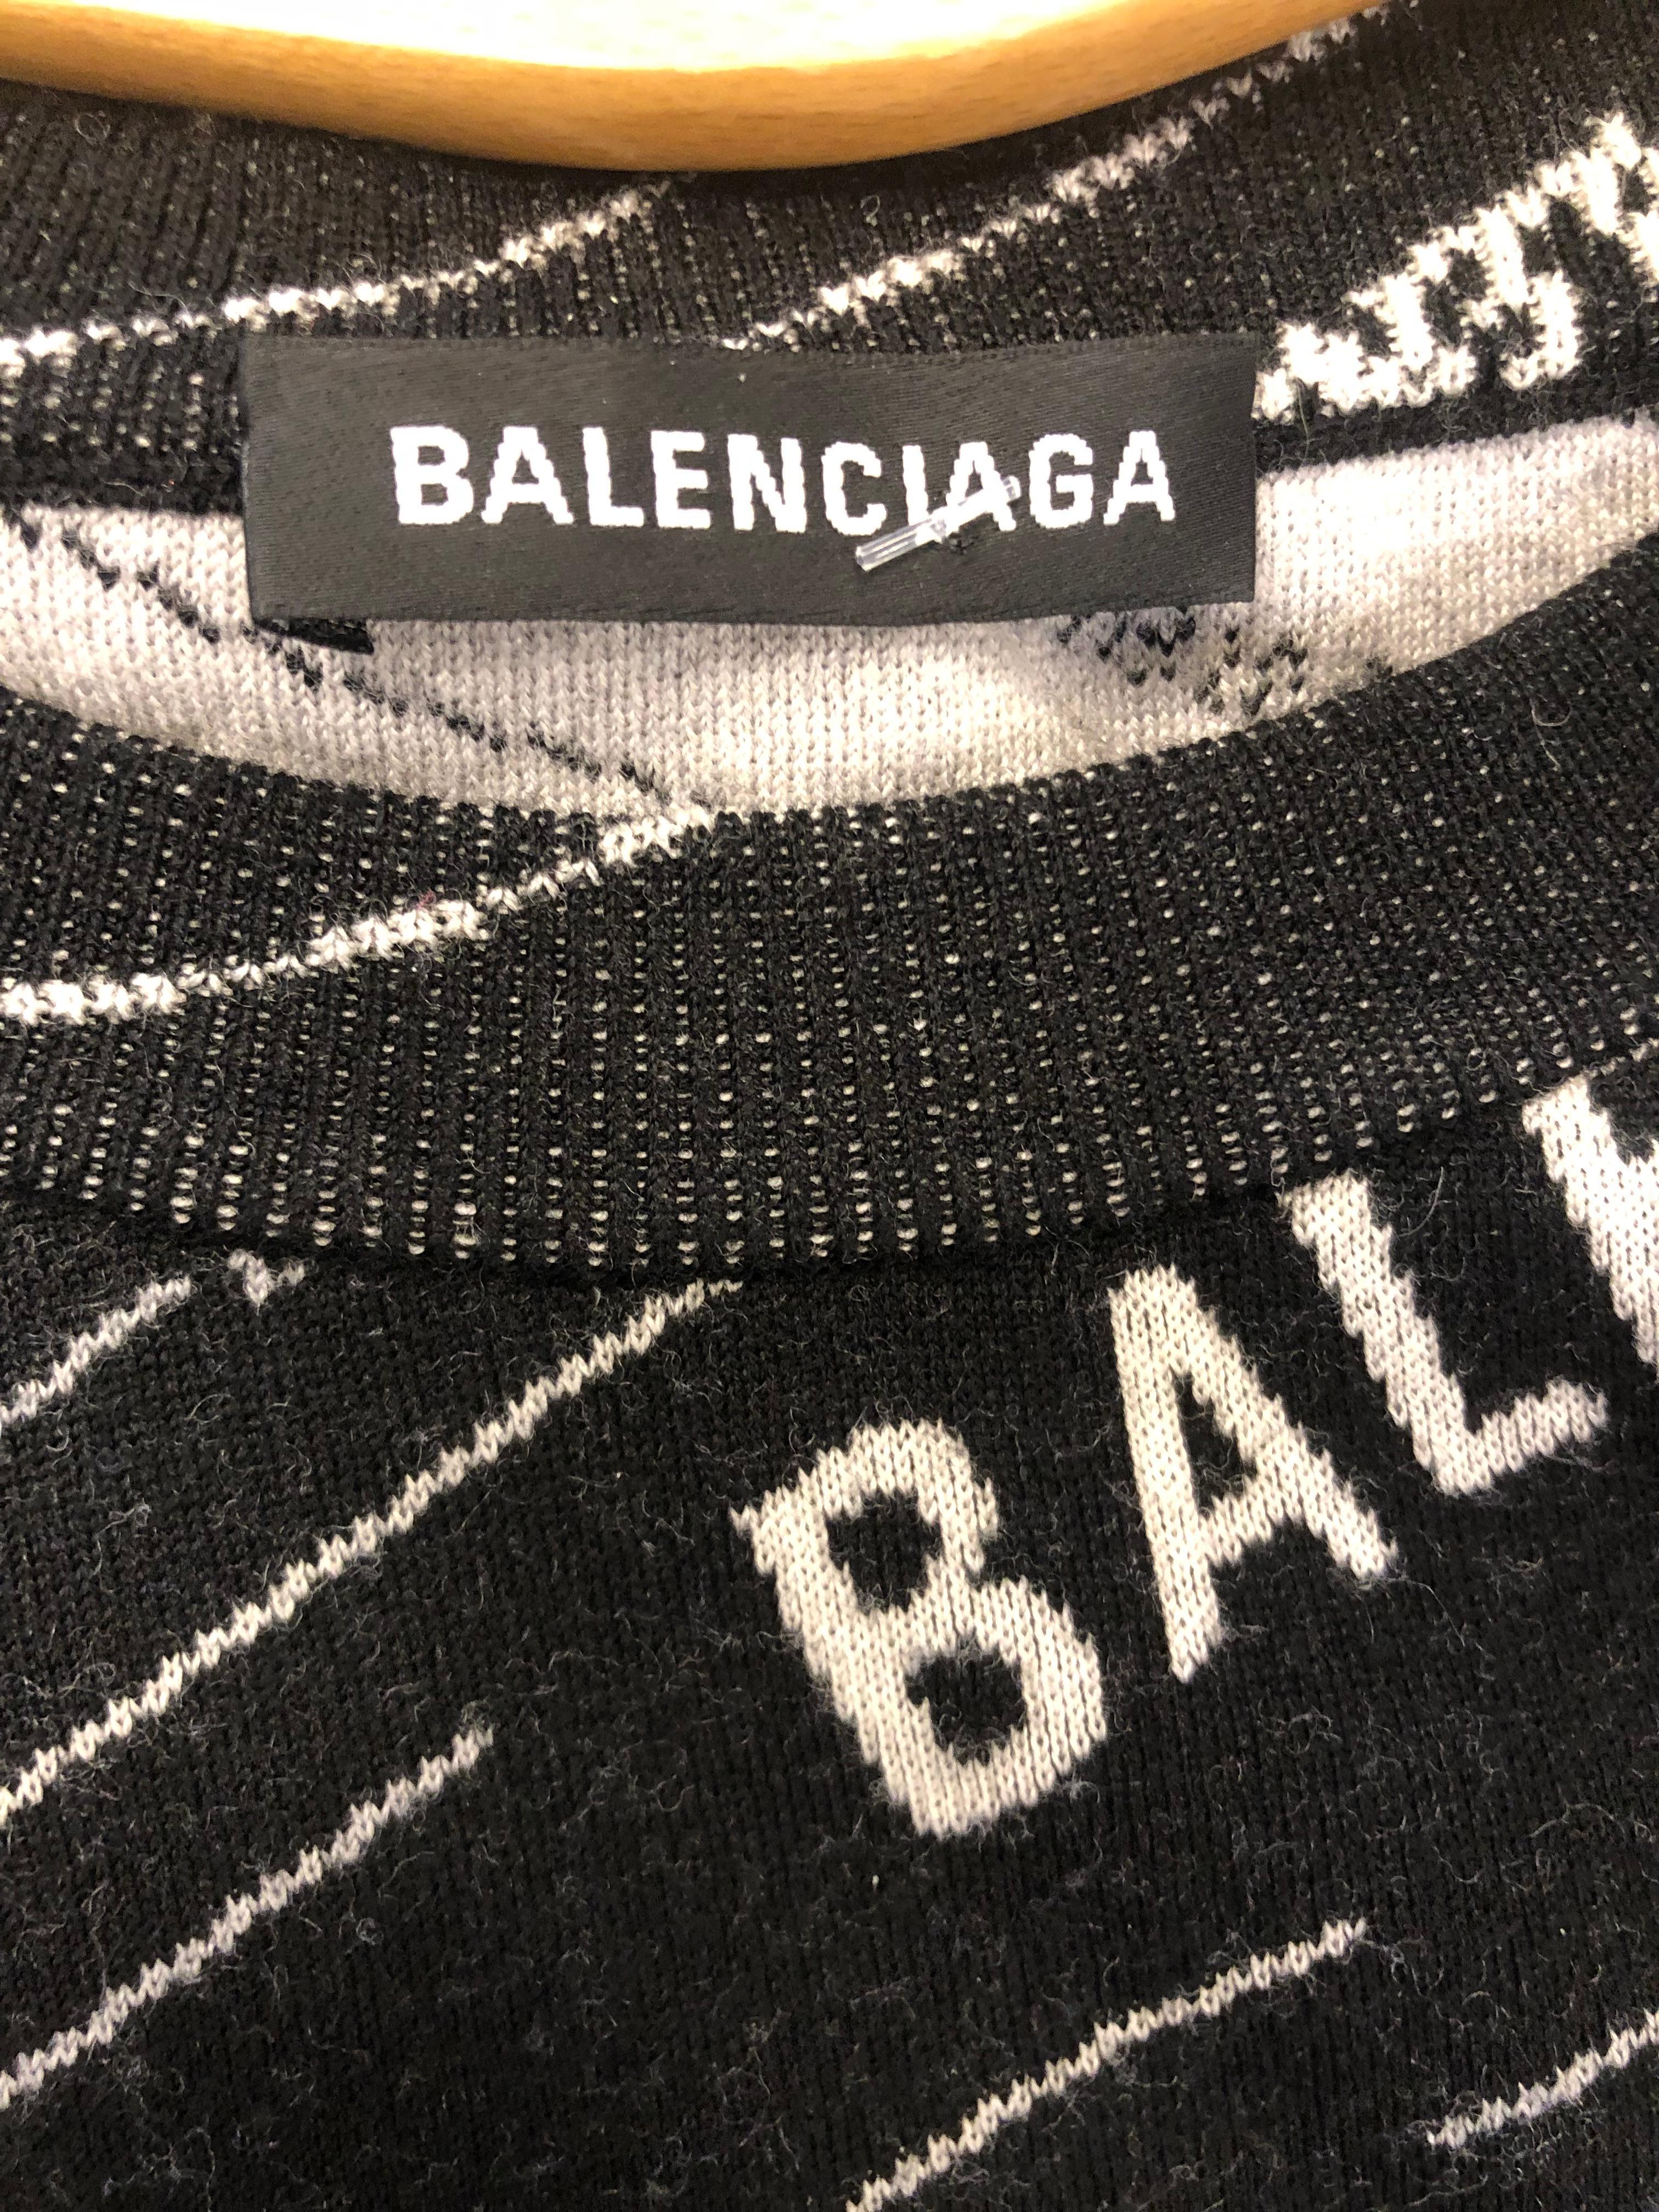 Balenciaga Black Logo Patterned  Sweater Size Small For Sale 2